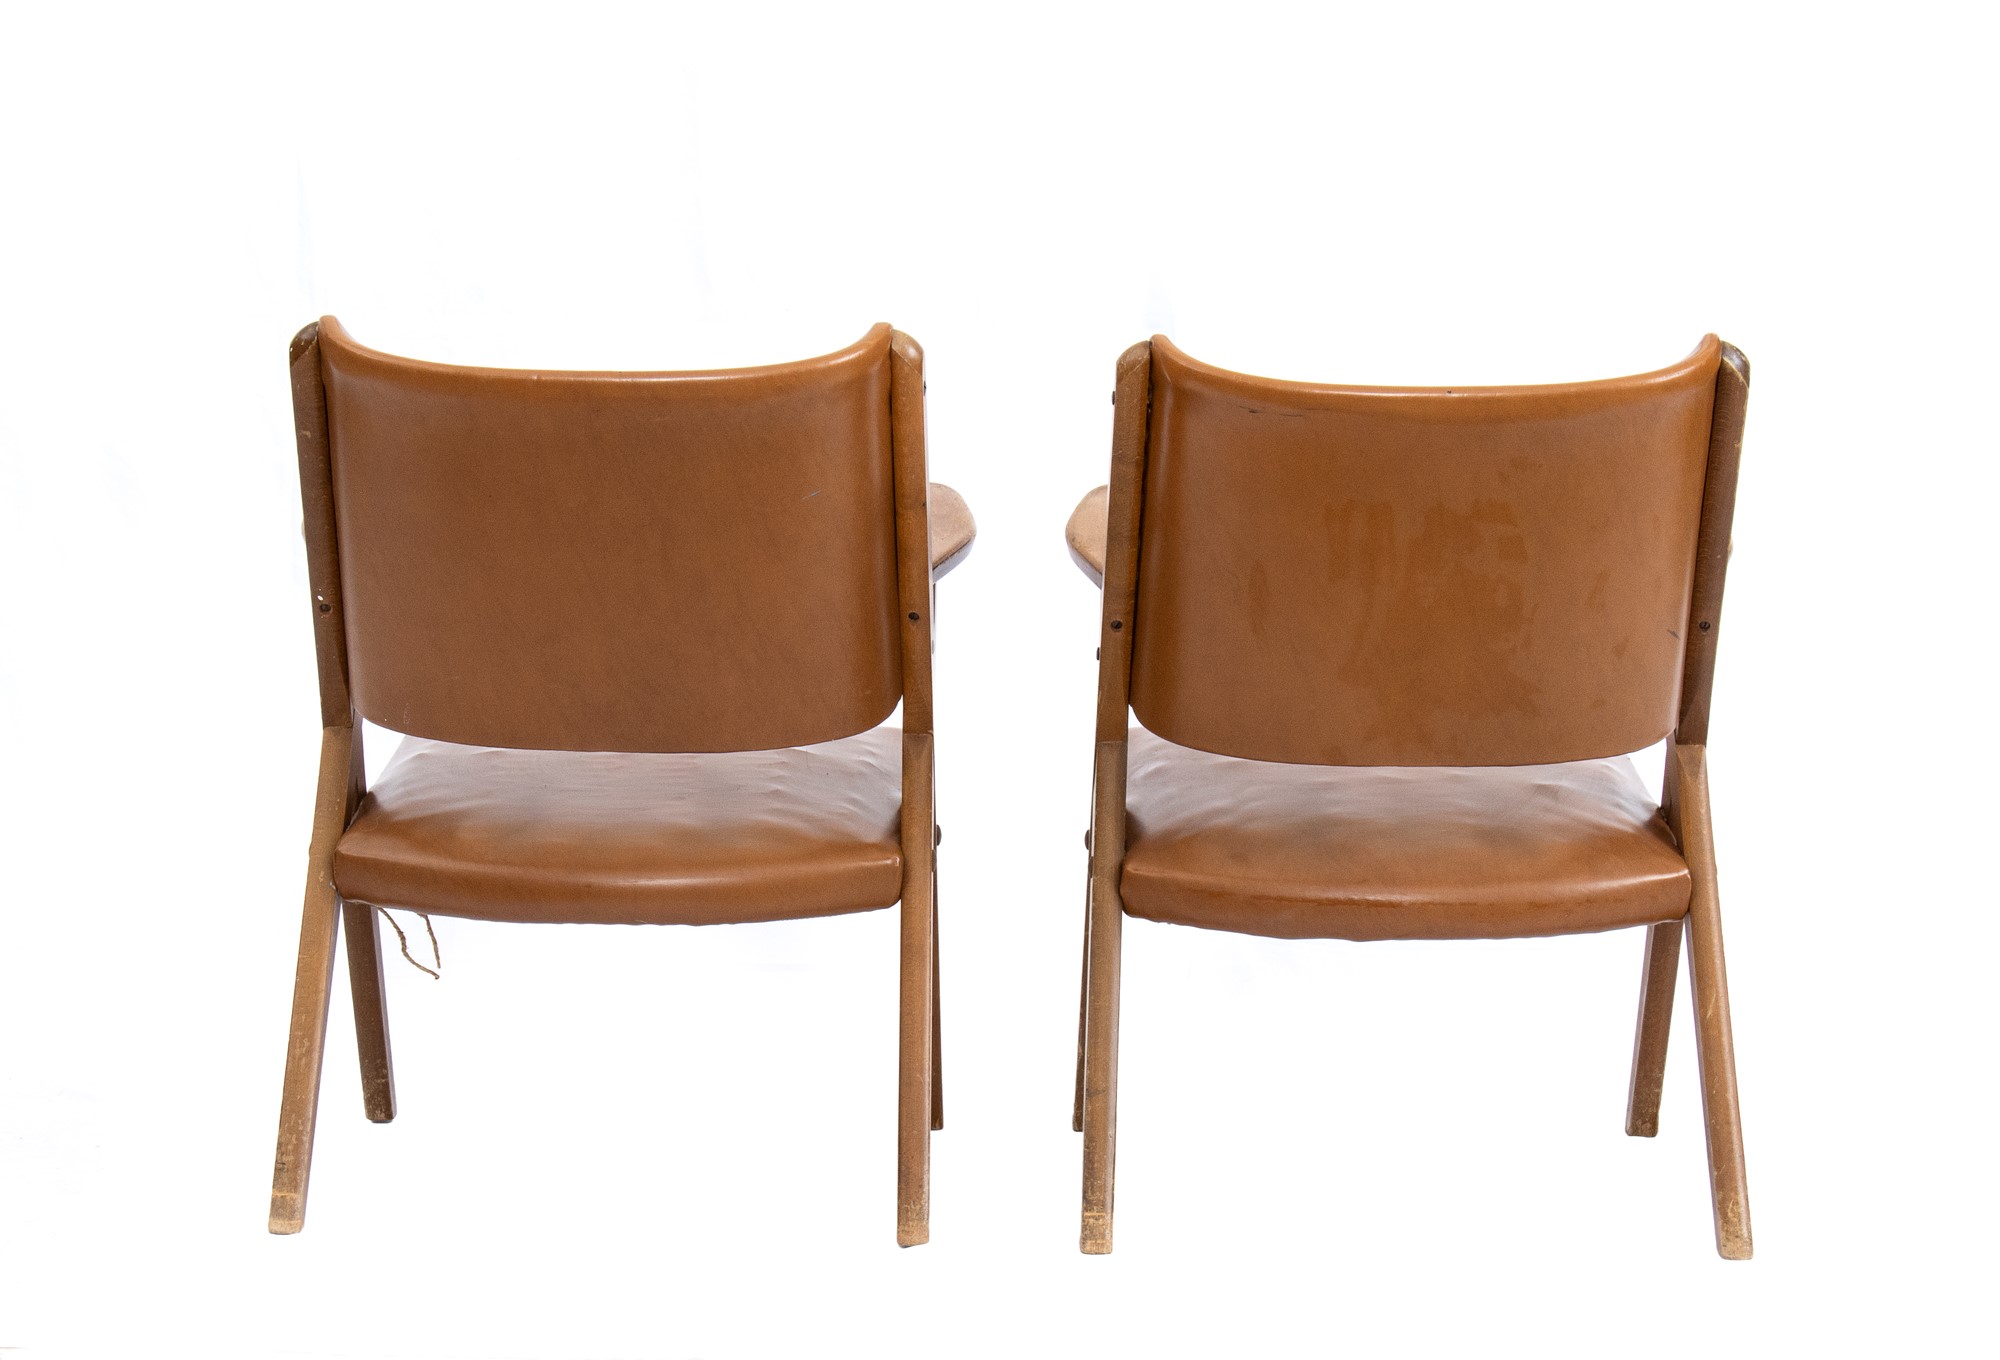 Dal Vera pair of armchairs with upholstered leather seats and backs - Image 12 of 17